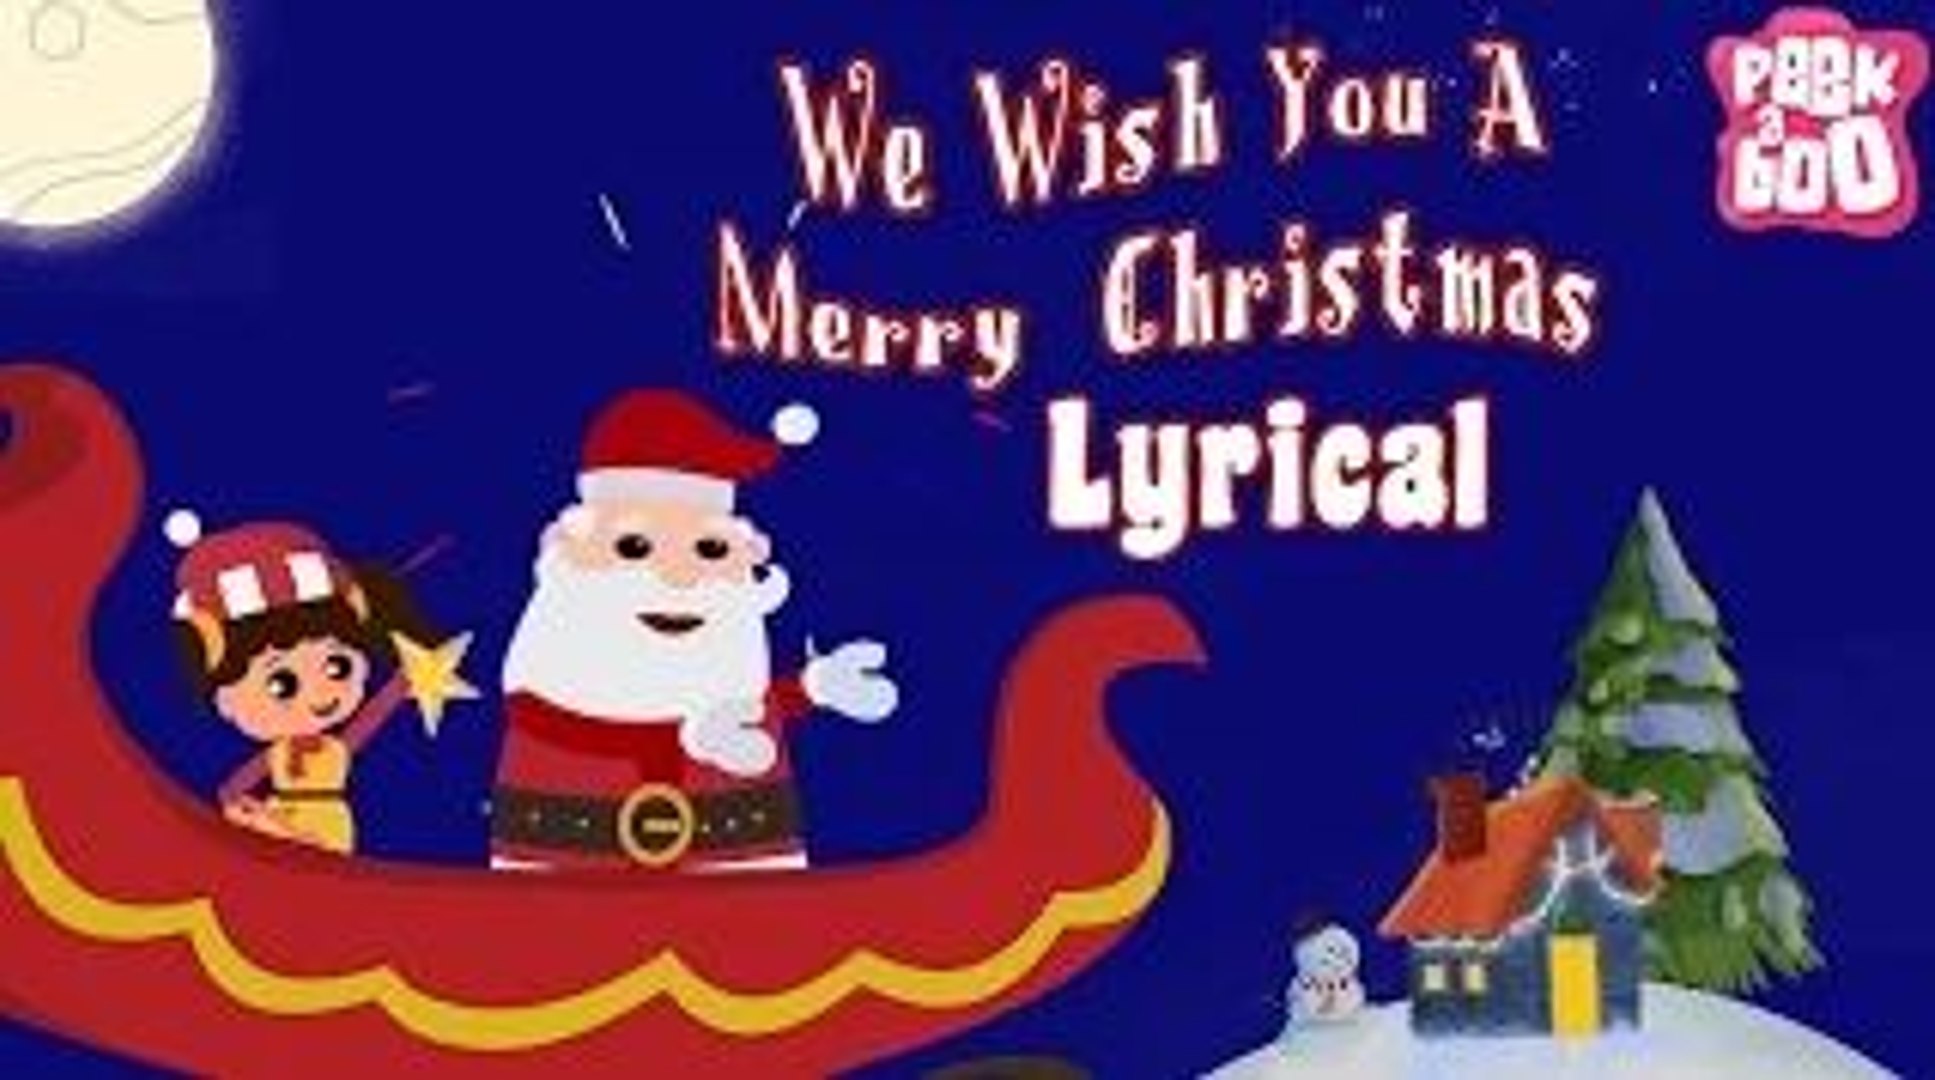 We Wish You A Merry Christmas And A Happy New Year Song With Lyrics Popular Christmas Song Video Dailymotion